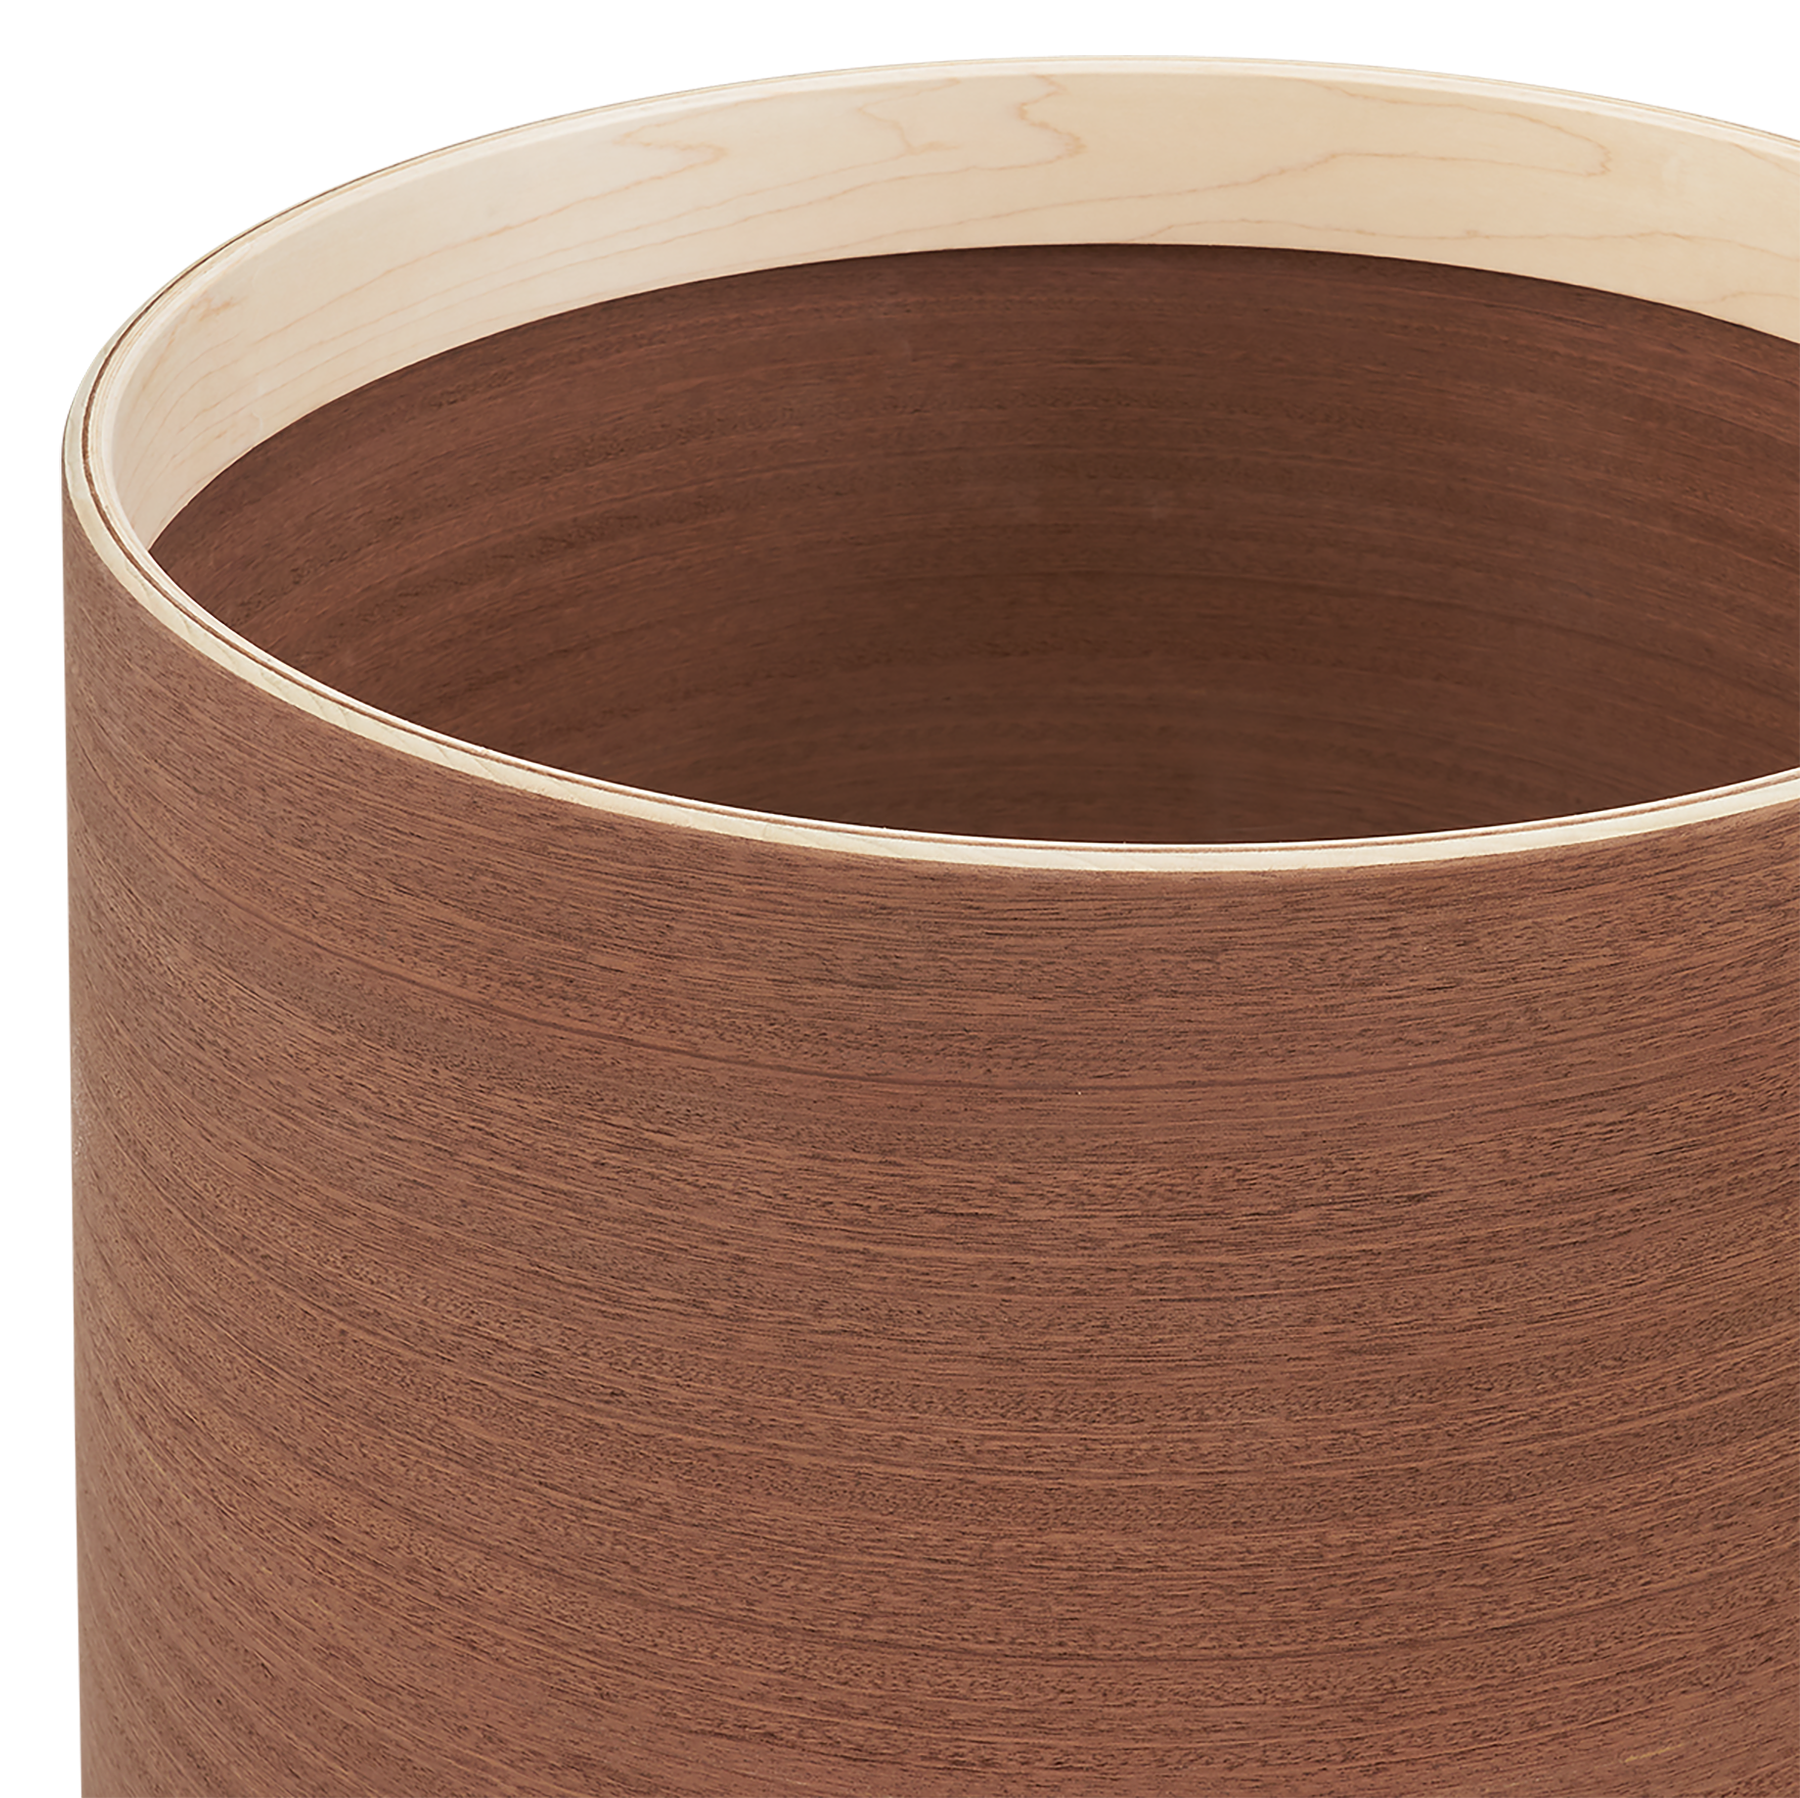 DW Collector's Classics Series Poplar Mahogany 3ply Drum Shell with Maple Reinforcement Ring